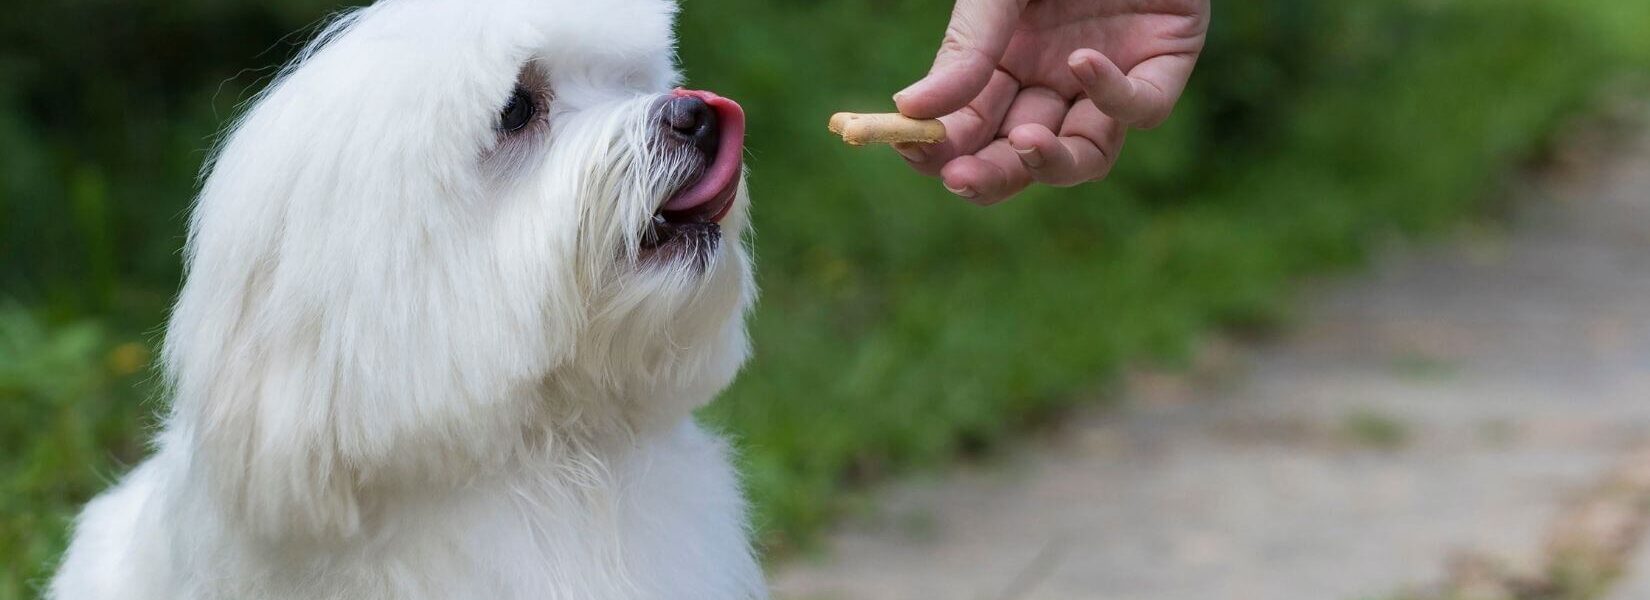 Small white dog getting a treat